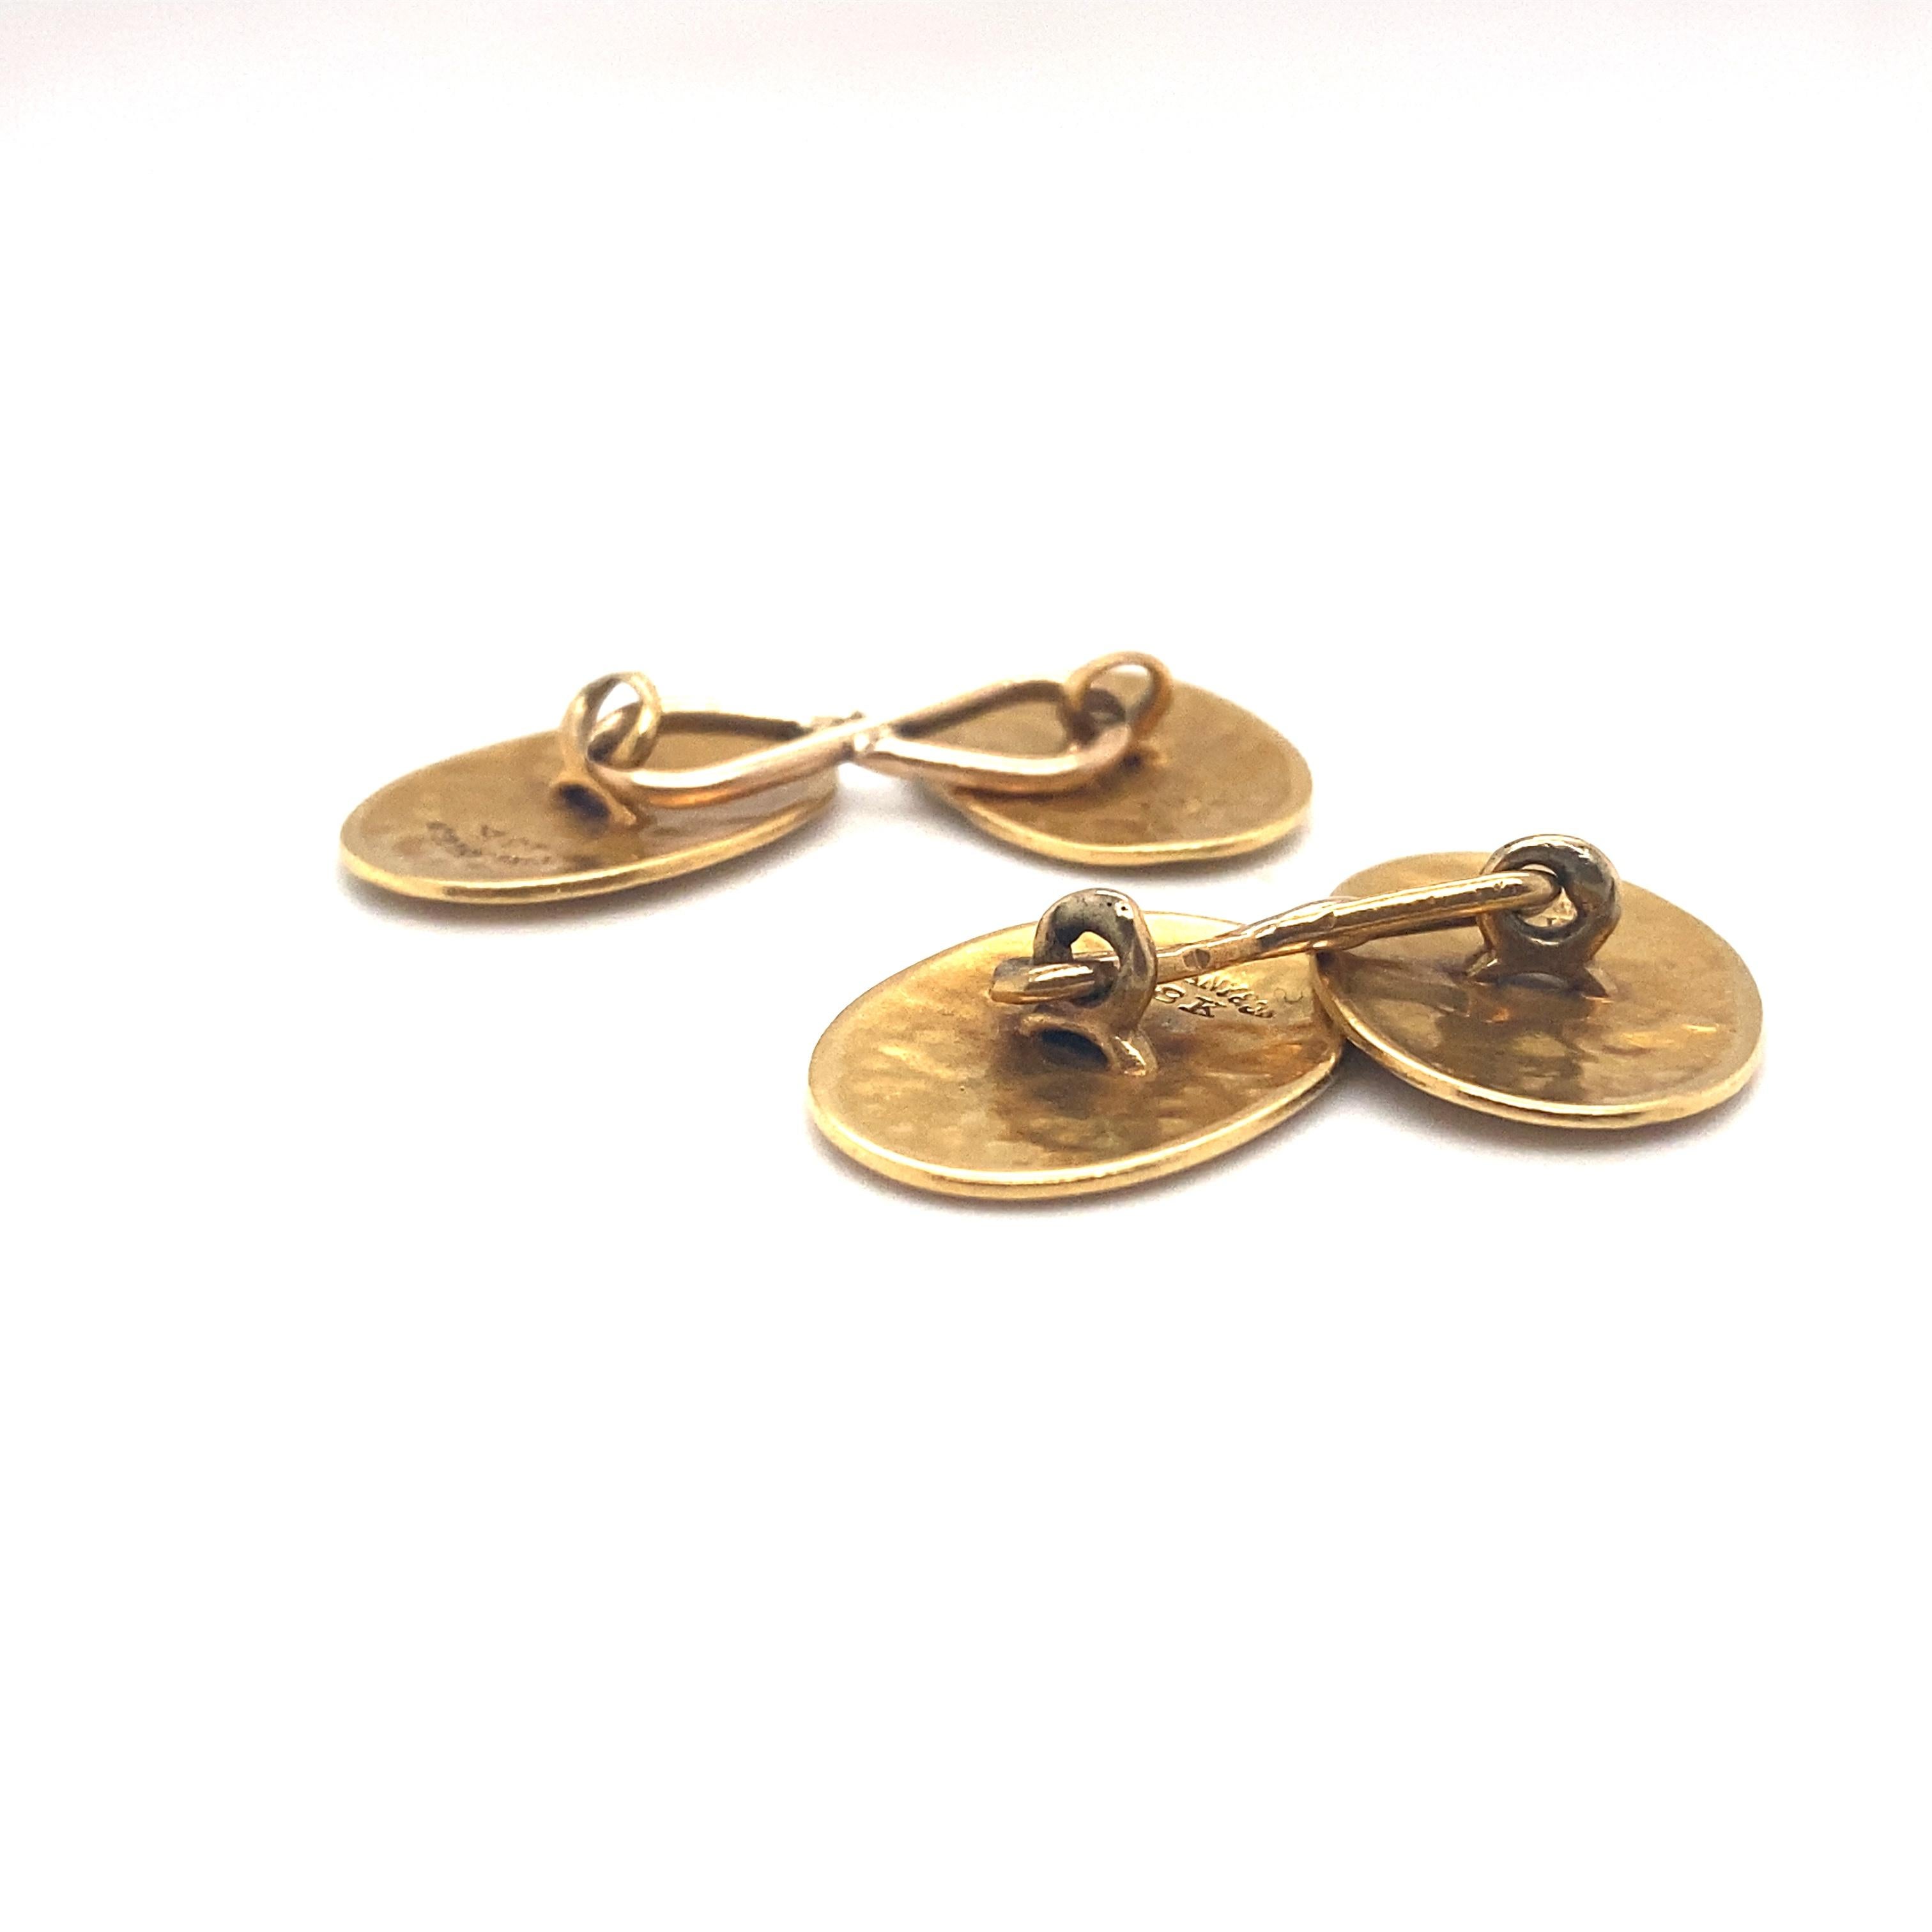 Circa 1890s Tiffany & Co. Etched Cufflinks in 18K Gold 1